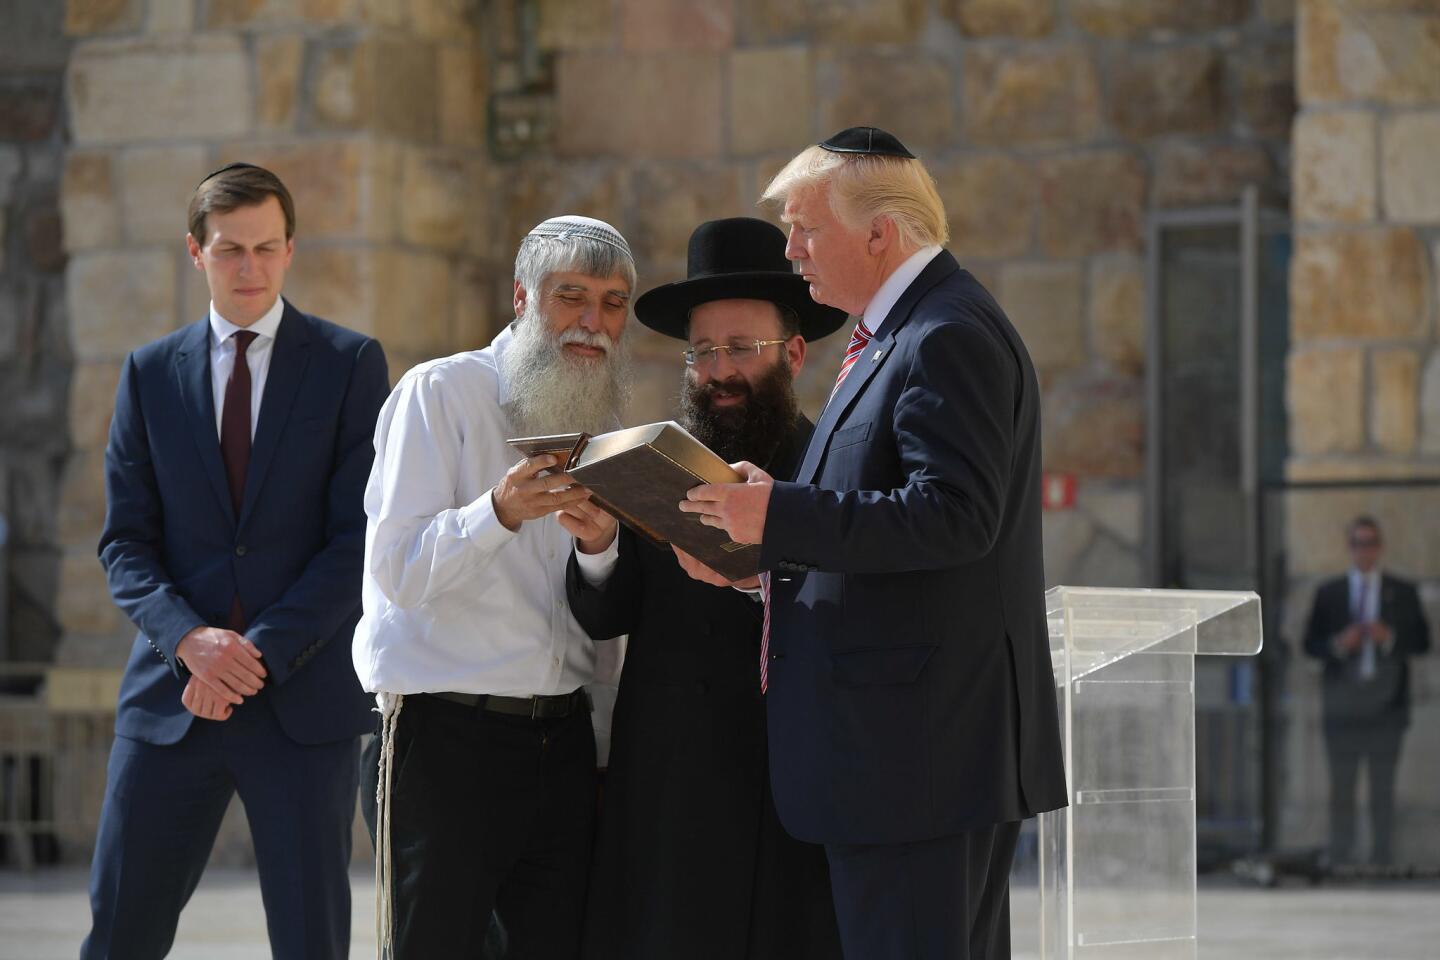 President Trump listens to Rabbi Shmuel Rabinovitch, center, during a visit to the Western Wall, in Jerusalem's Old City. At left is Trump's son-in-law and advisor, Jared Kushner.